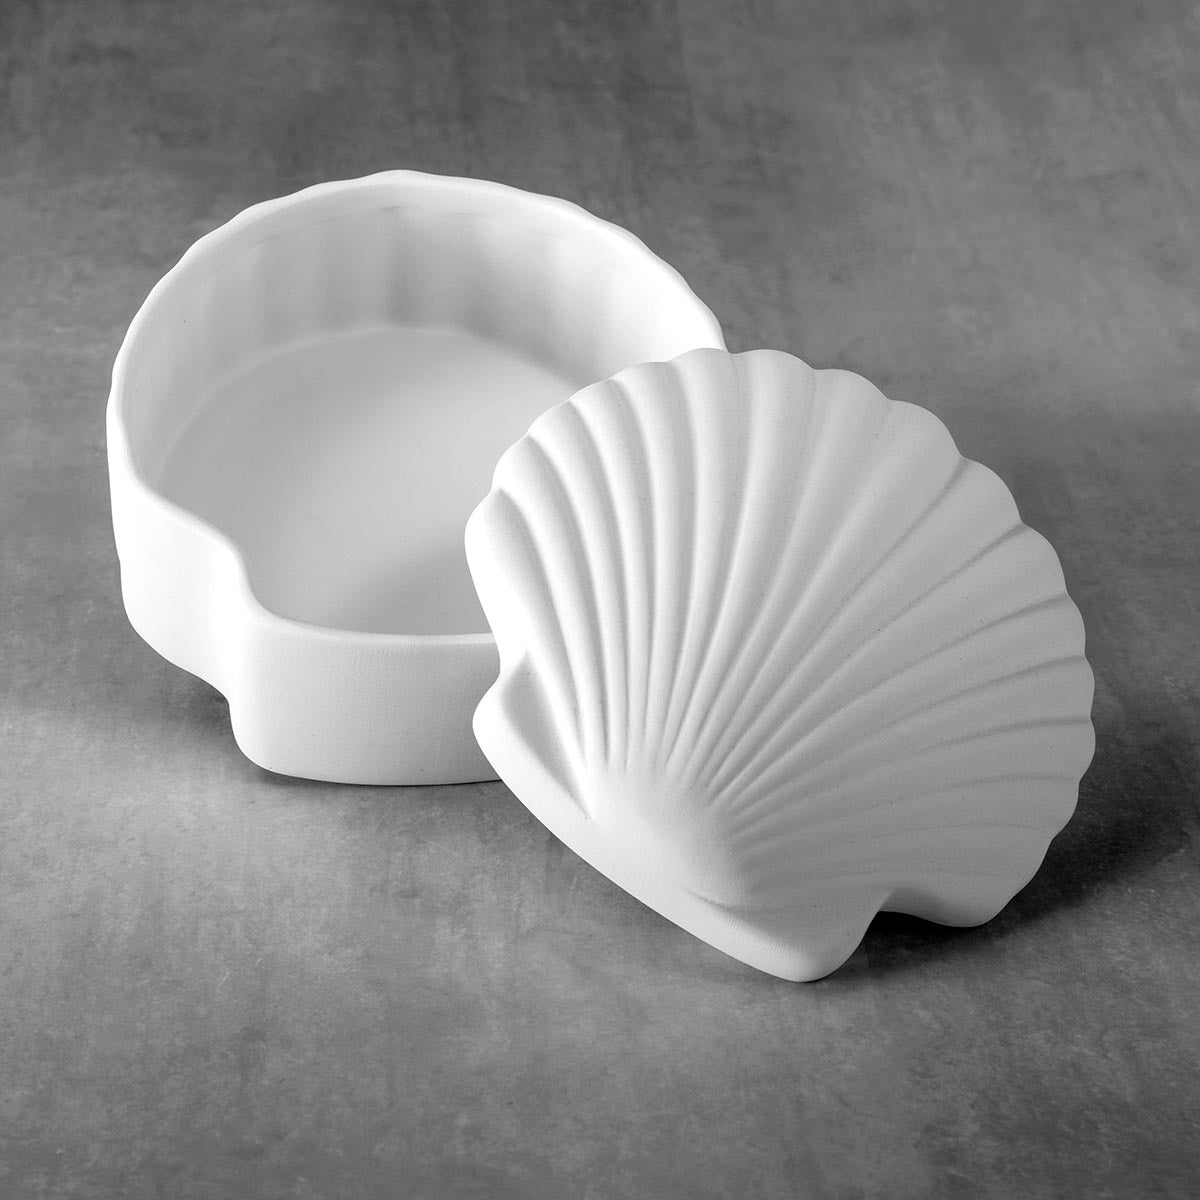 Duncan - 37484 Bisque Scallop Shell Box - Sounding Stone